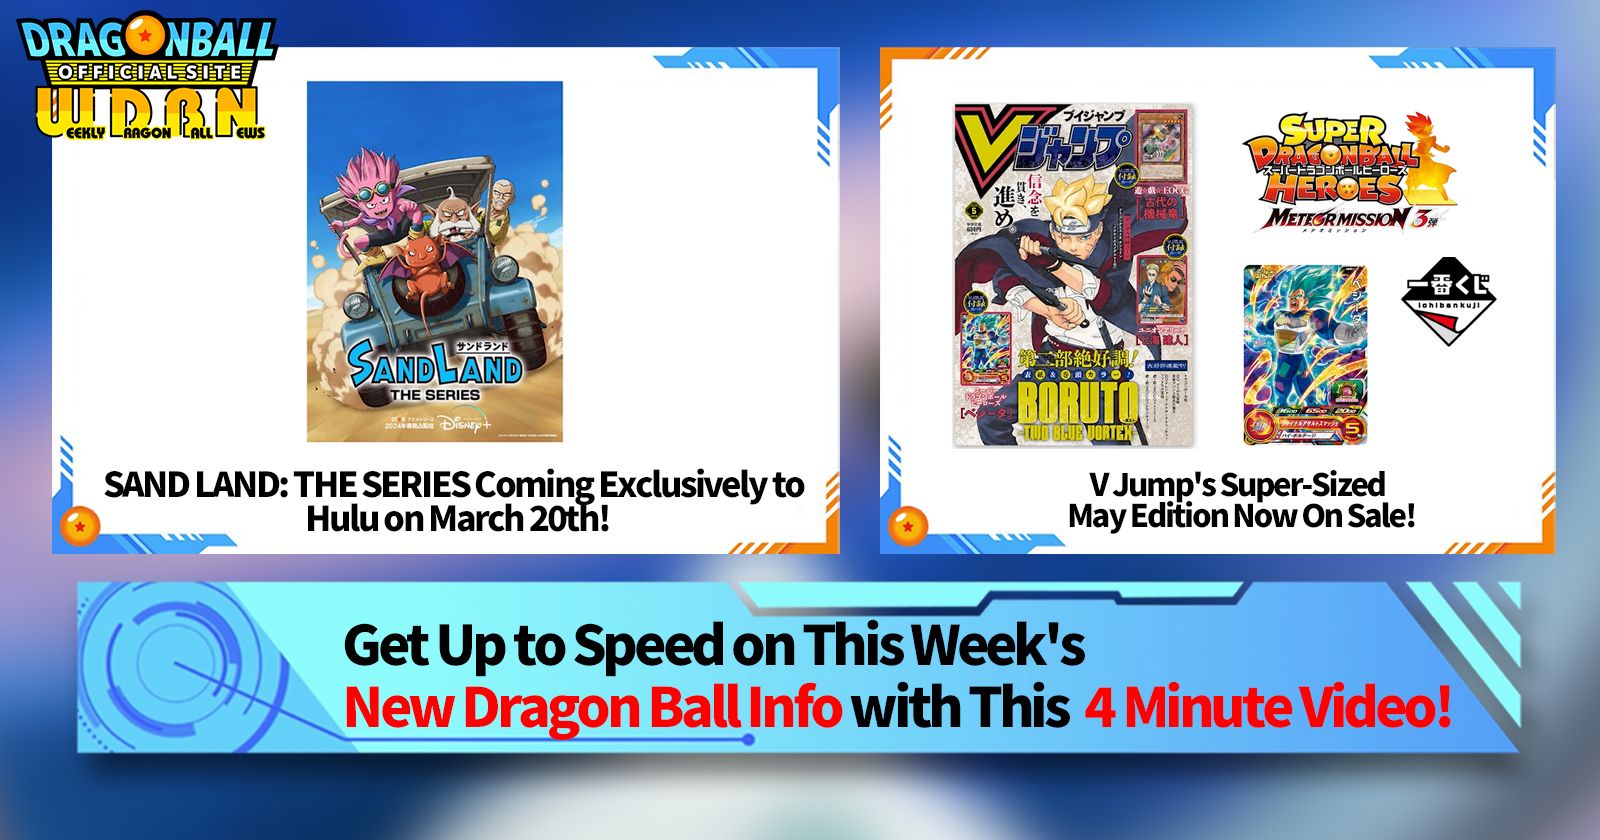 [March 18th] Weekly Dragon Ball News Broadcast!